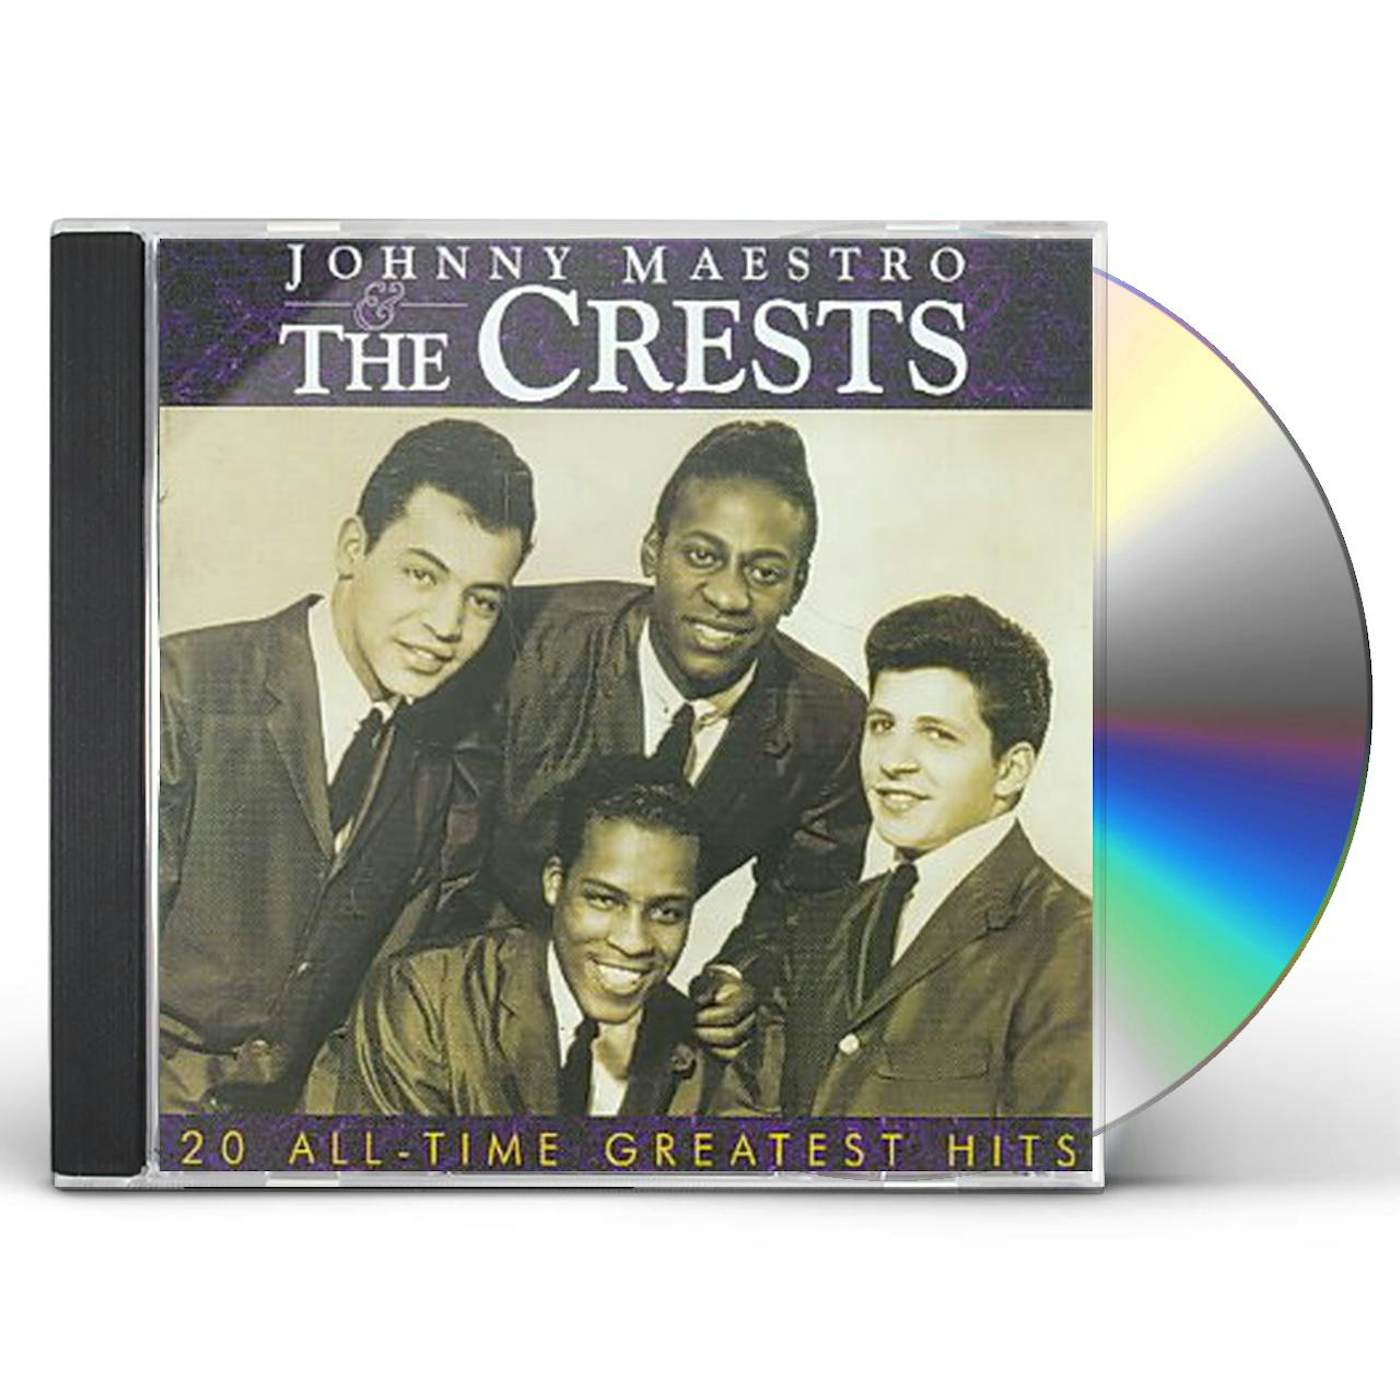 Johnny Maestro & The Crests - 20 All-Time Greatest Hits CD